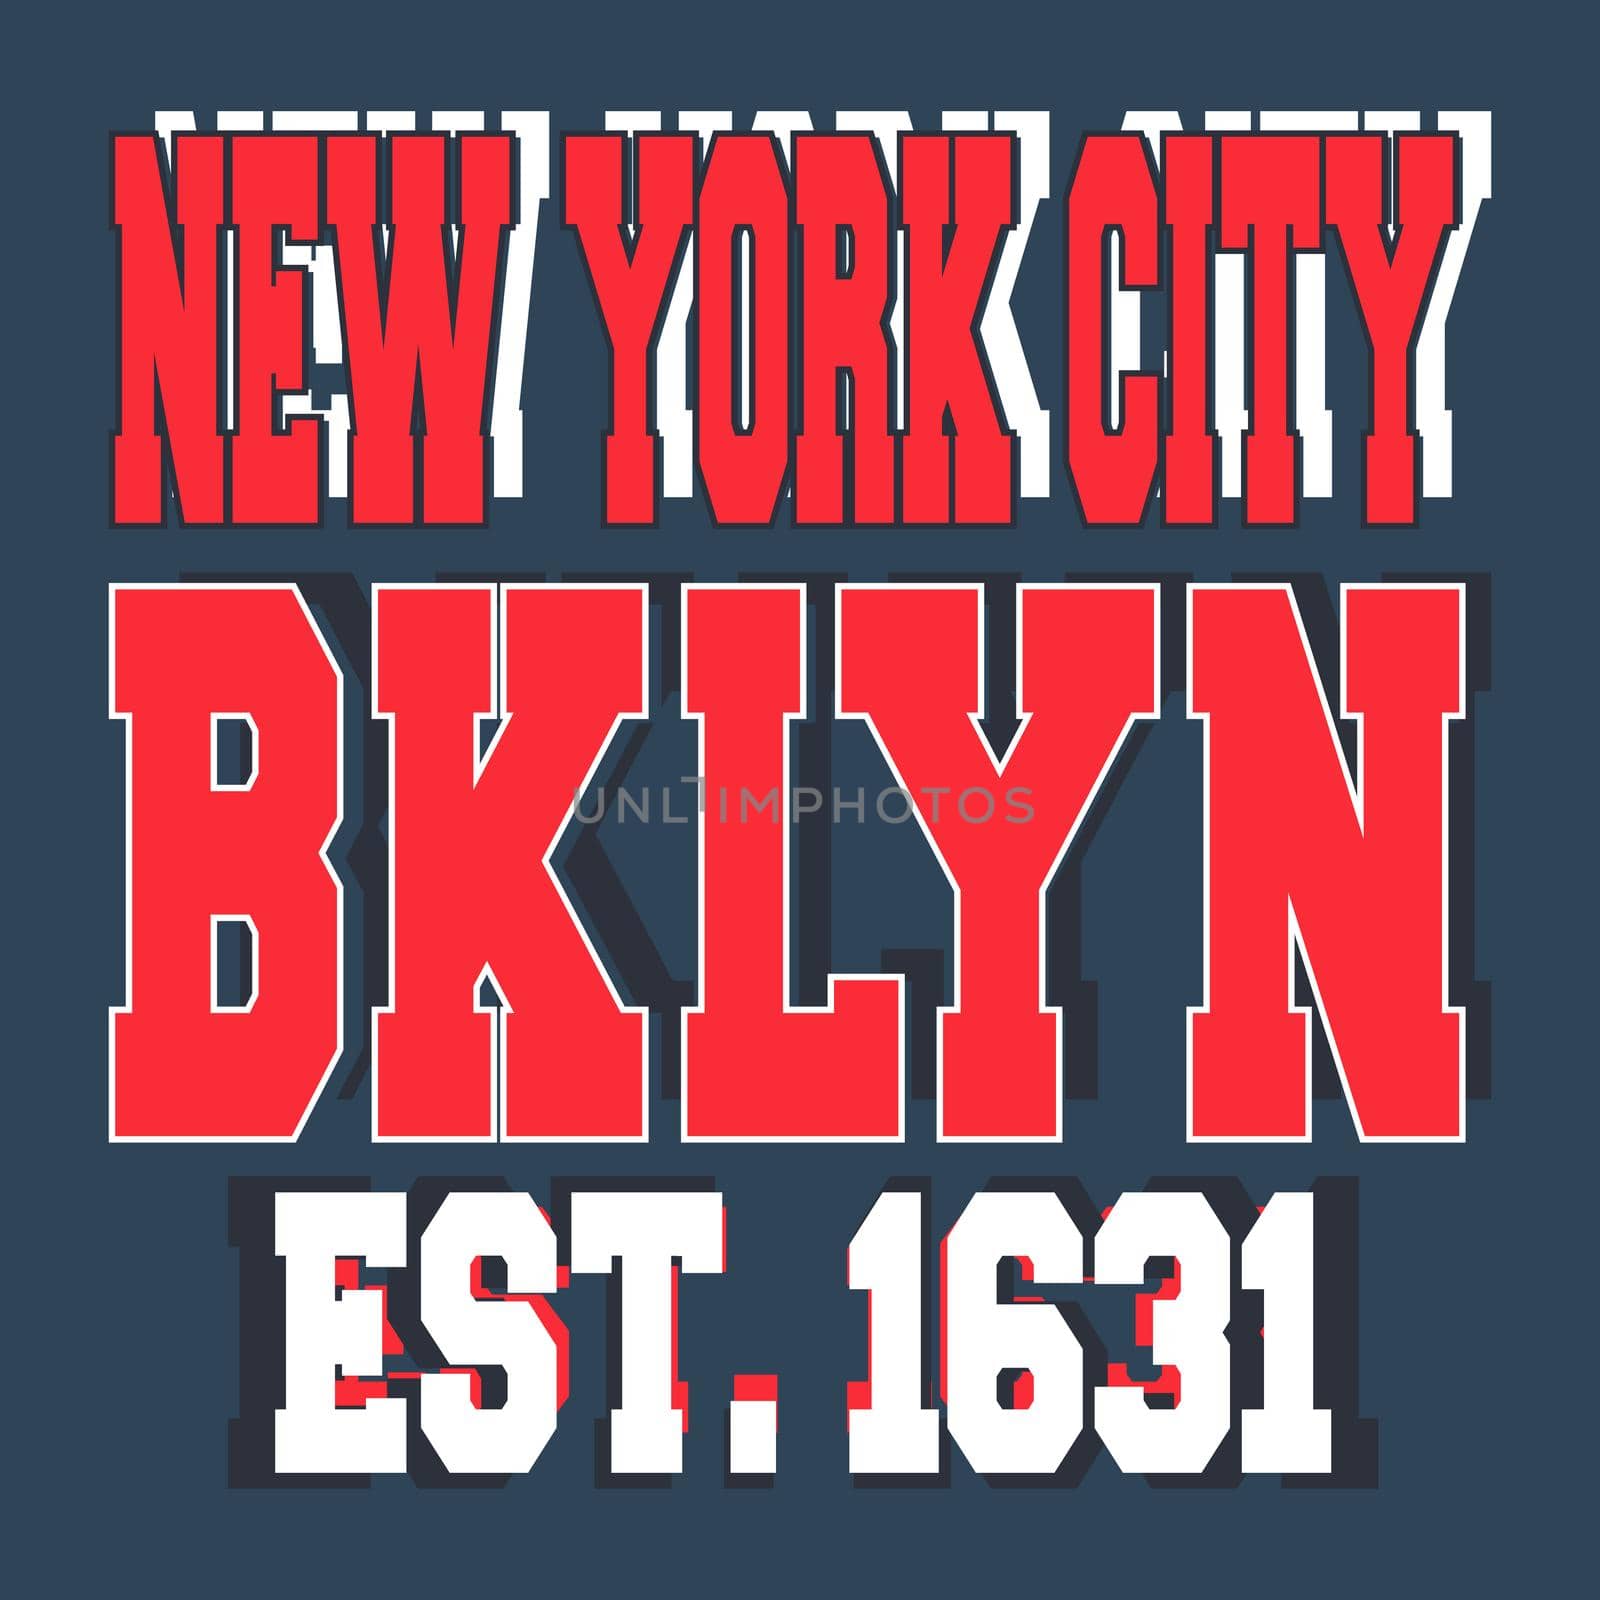 T-shirt print design. Broolklyn New York vintage stamp. Printing and badge applique label t-shirts, jeans, casual wear. Vector illustration.